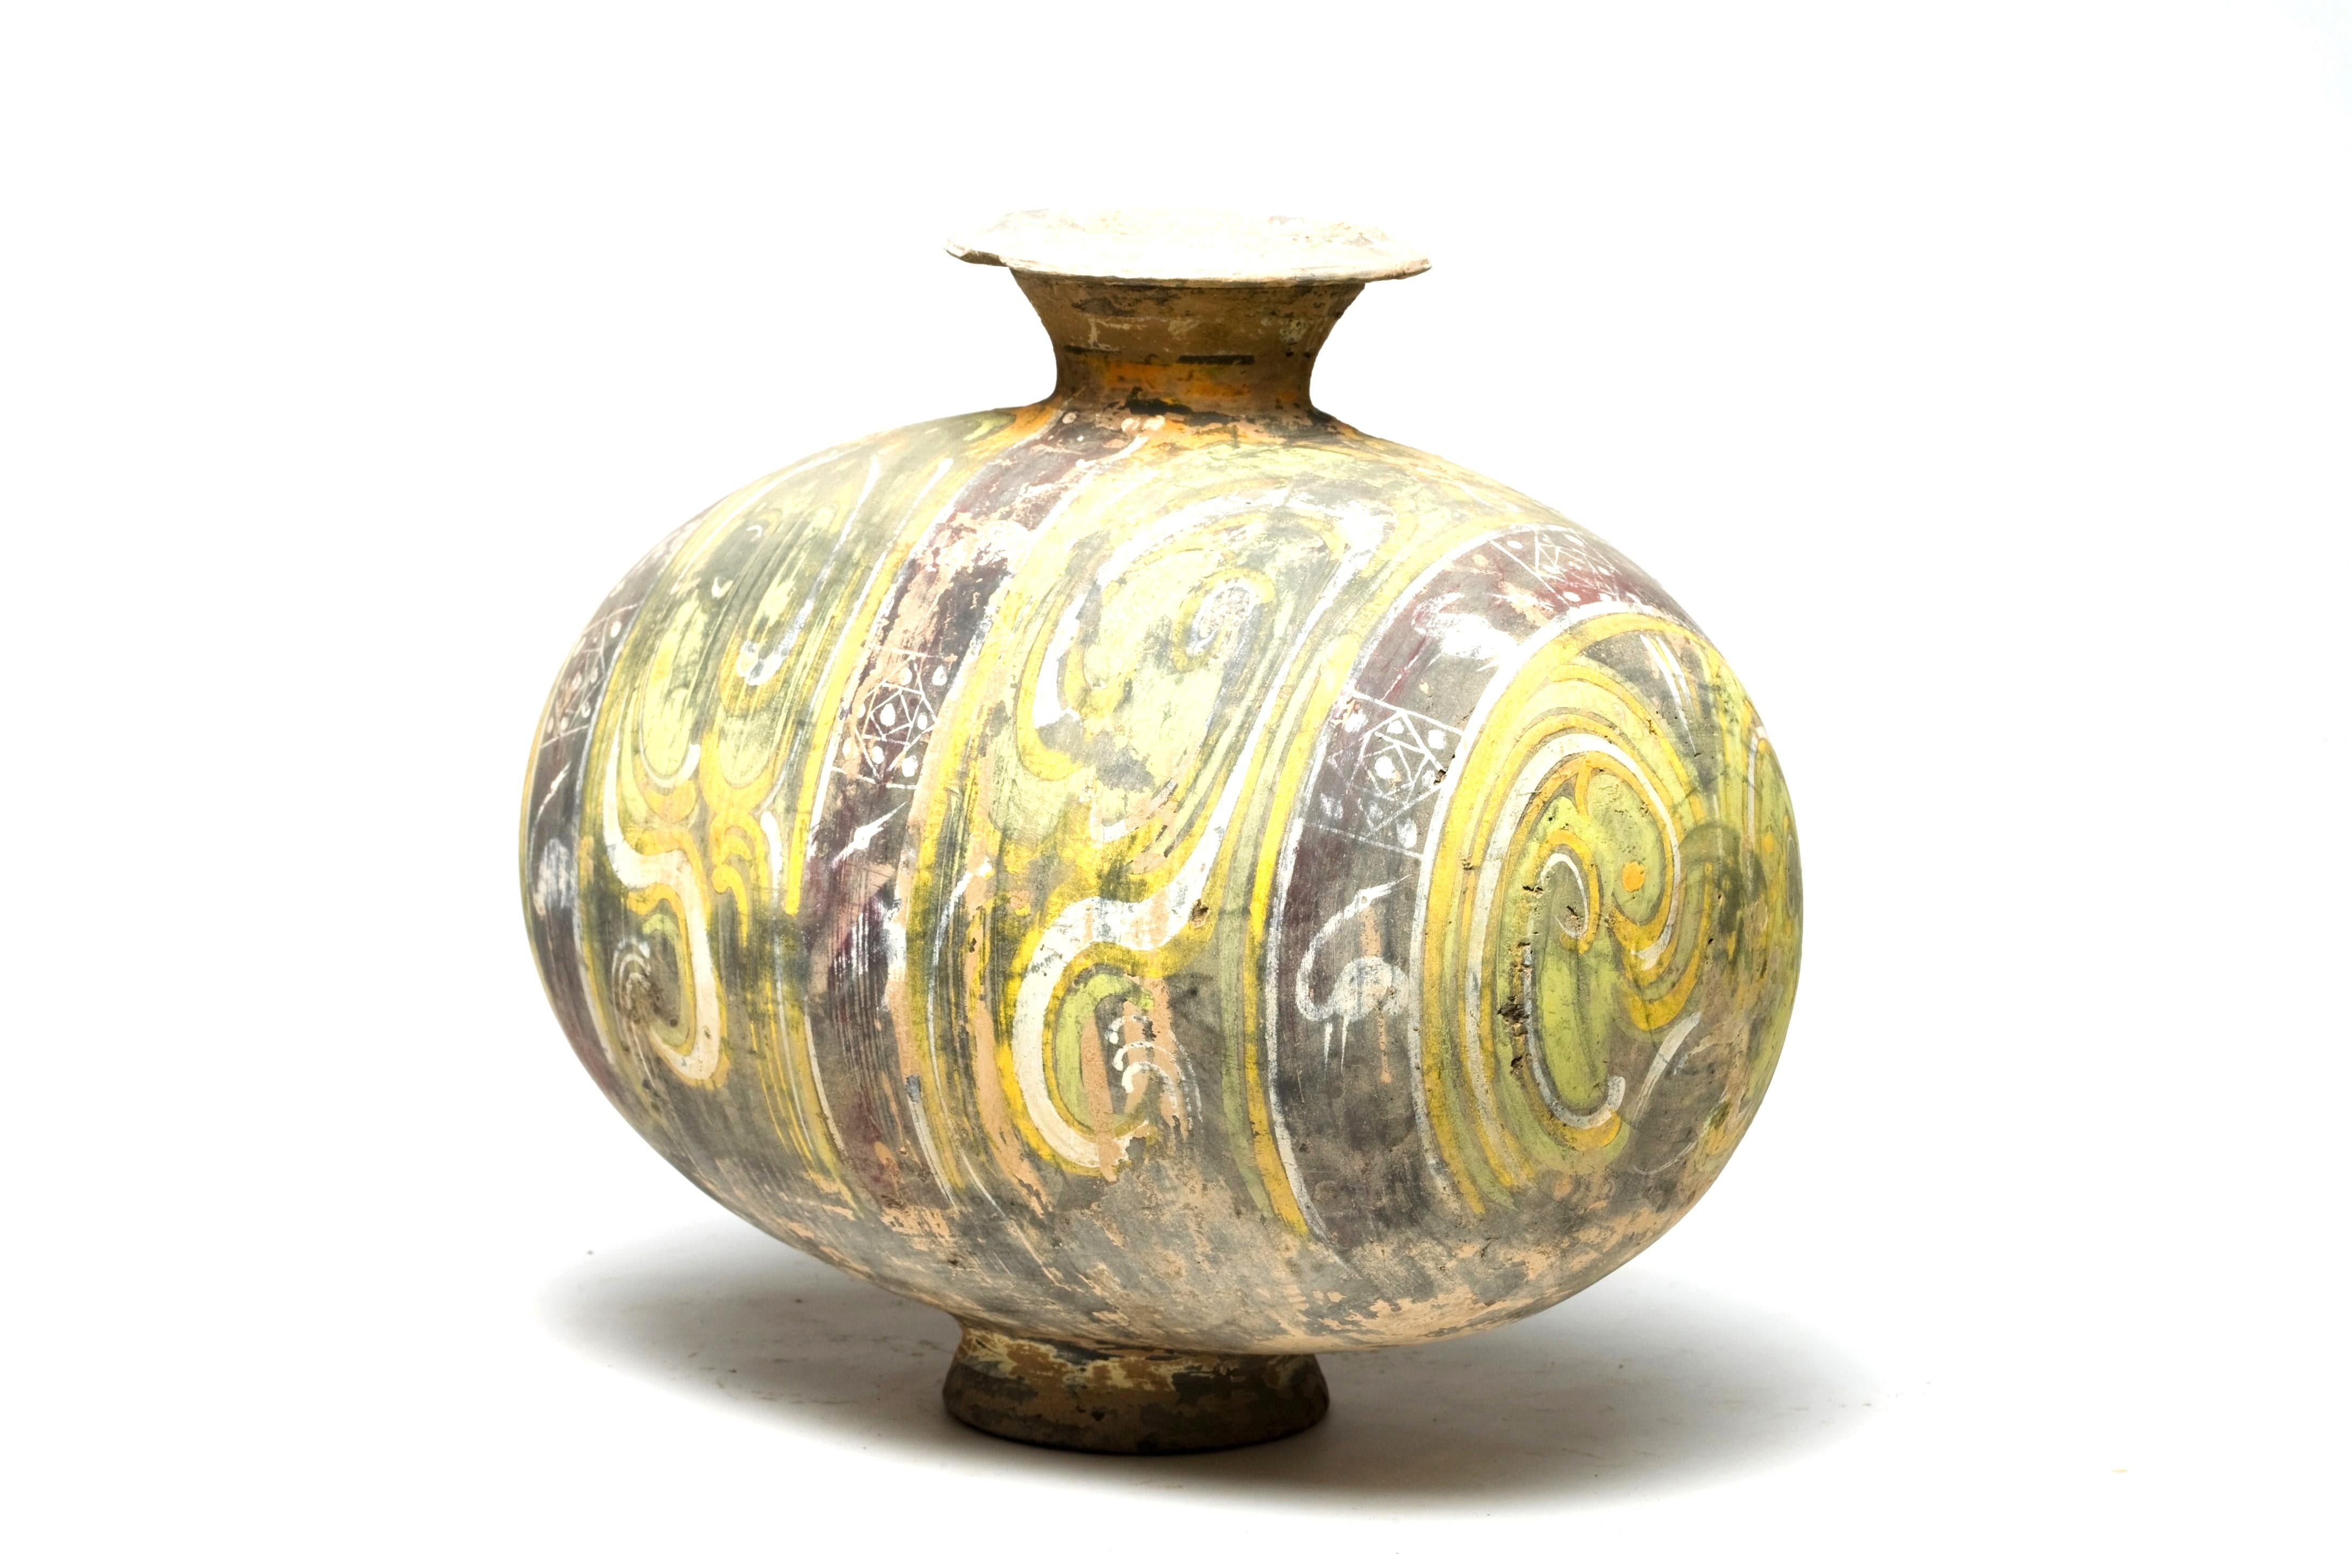 This yellow handsome jar with excellent condition would have served as a mortuary object (mingqi), placed in a tomb as a substitute for the more valuable bronze and lacquer vessels used in daily life. Along with a variety of other funerary